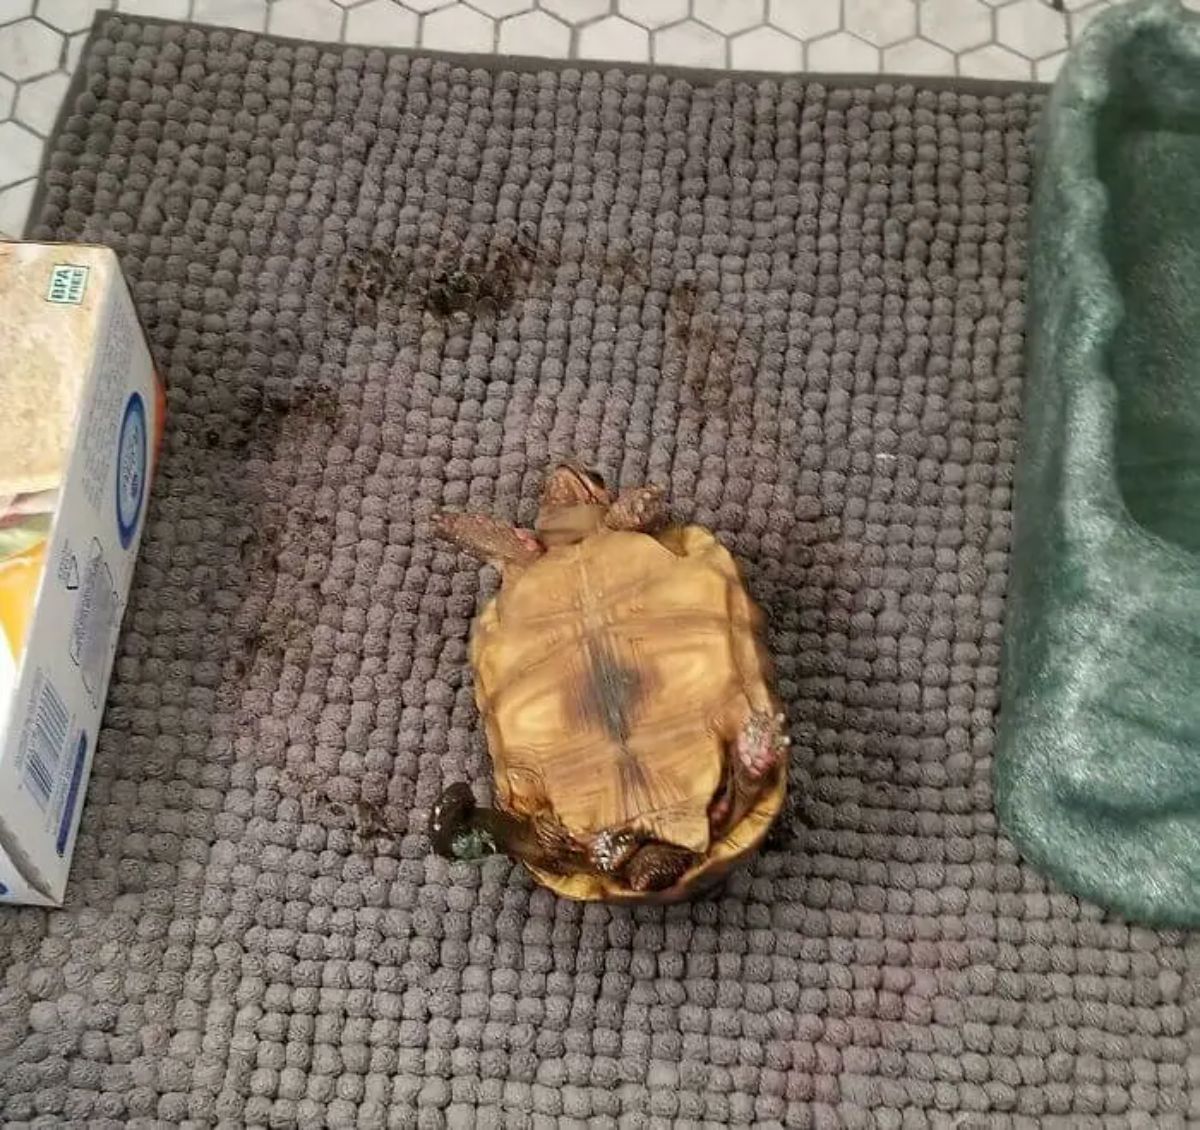 brown tortoise upside down on its shell on a brown carpet